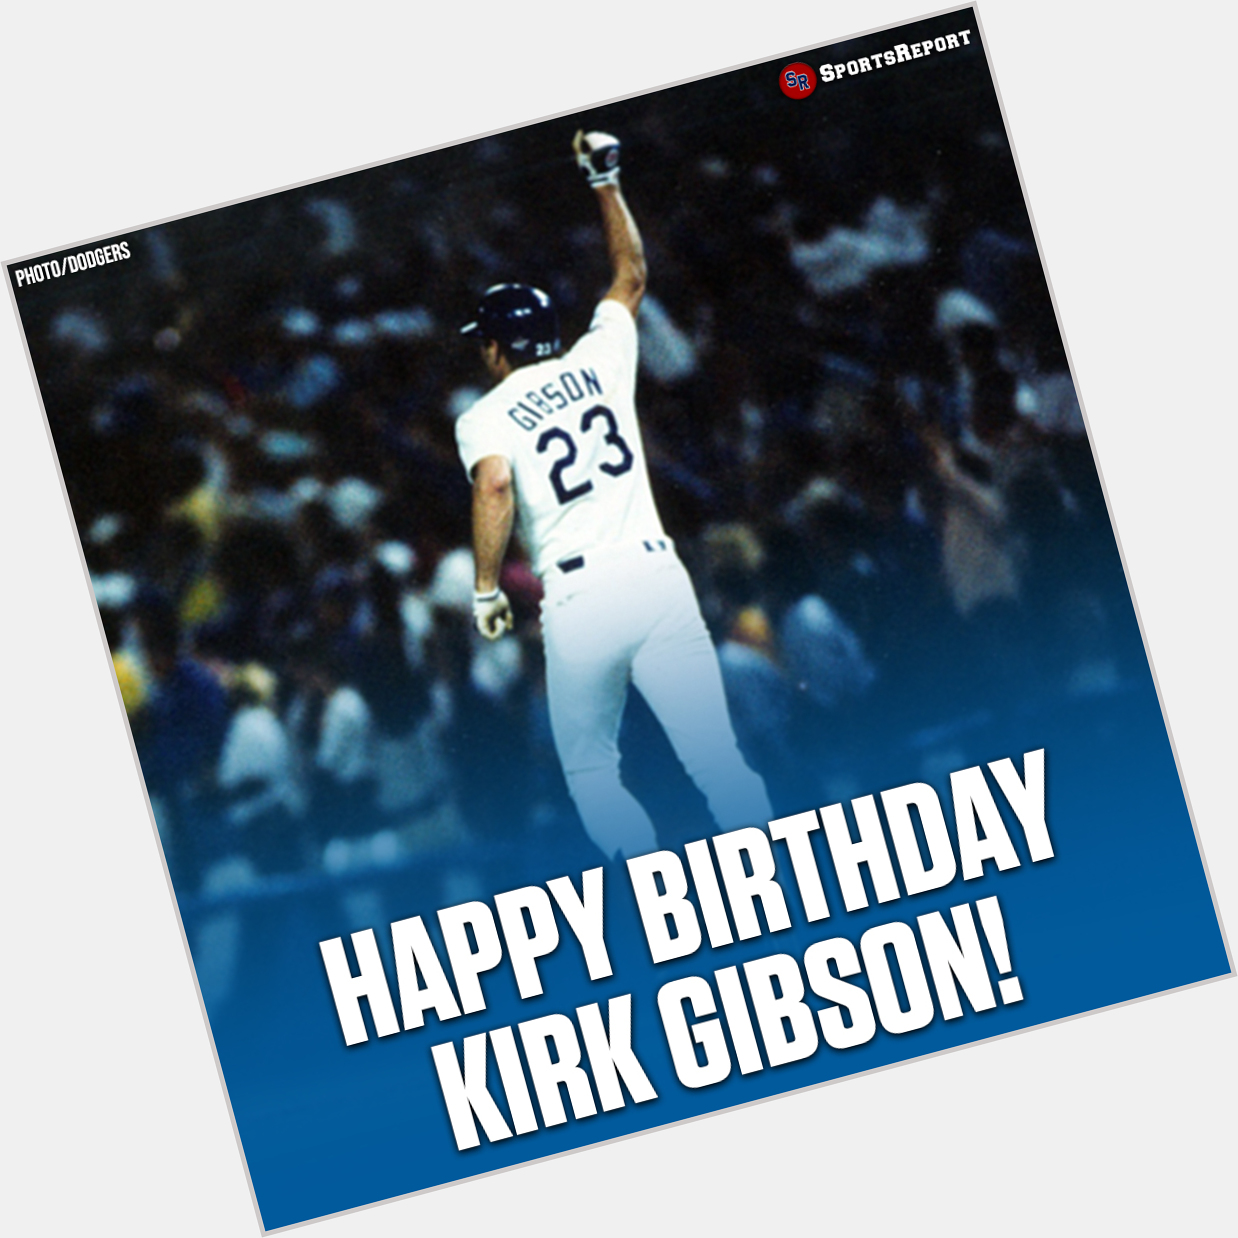 Dodgers Fans, let\s wish Legend Kirk Gibson a Happy Birthday!! 